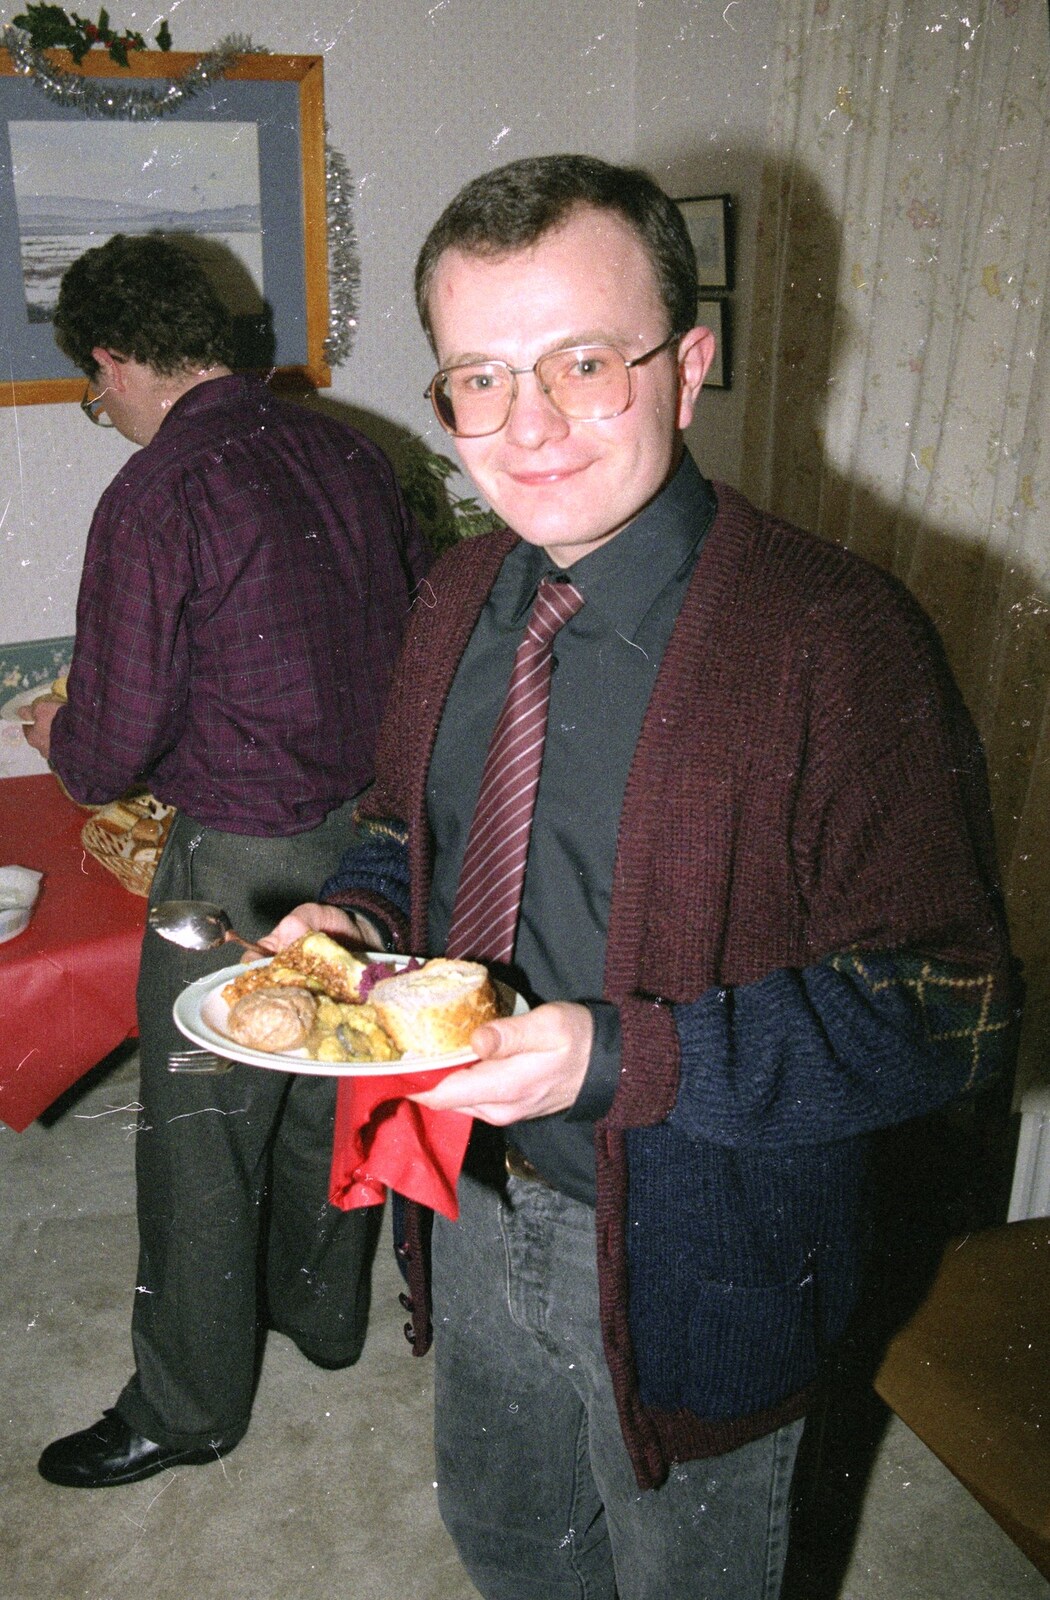 Hamish with a stack of food from New Year's Eve at Phil's, Hordle, Hampshire - 31st December 1990